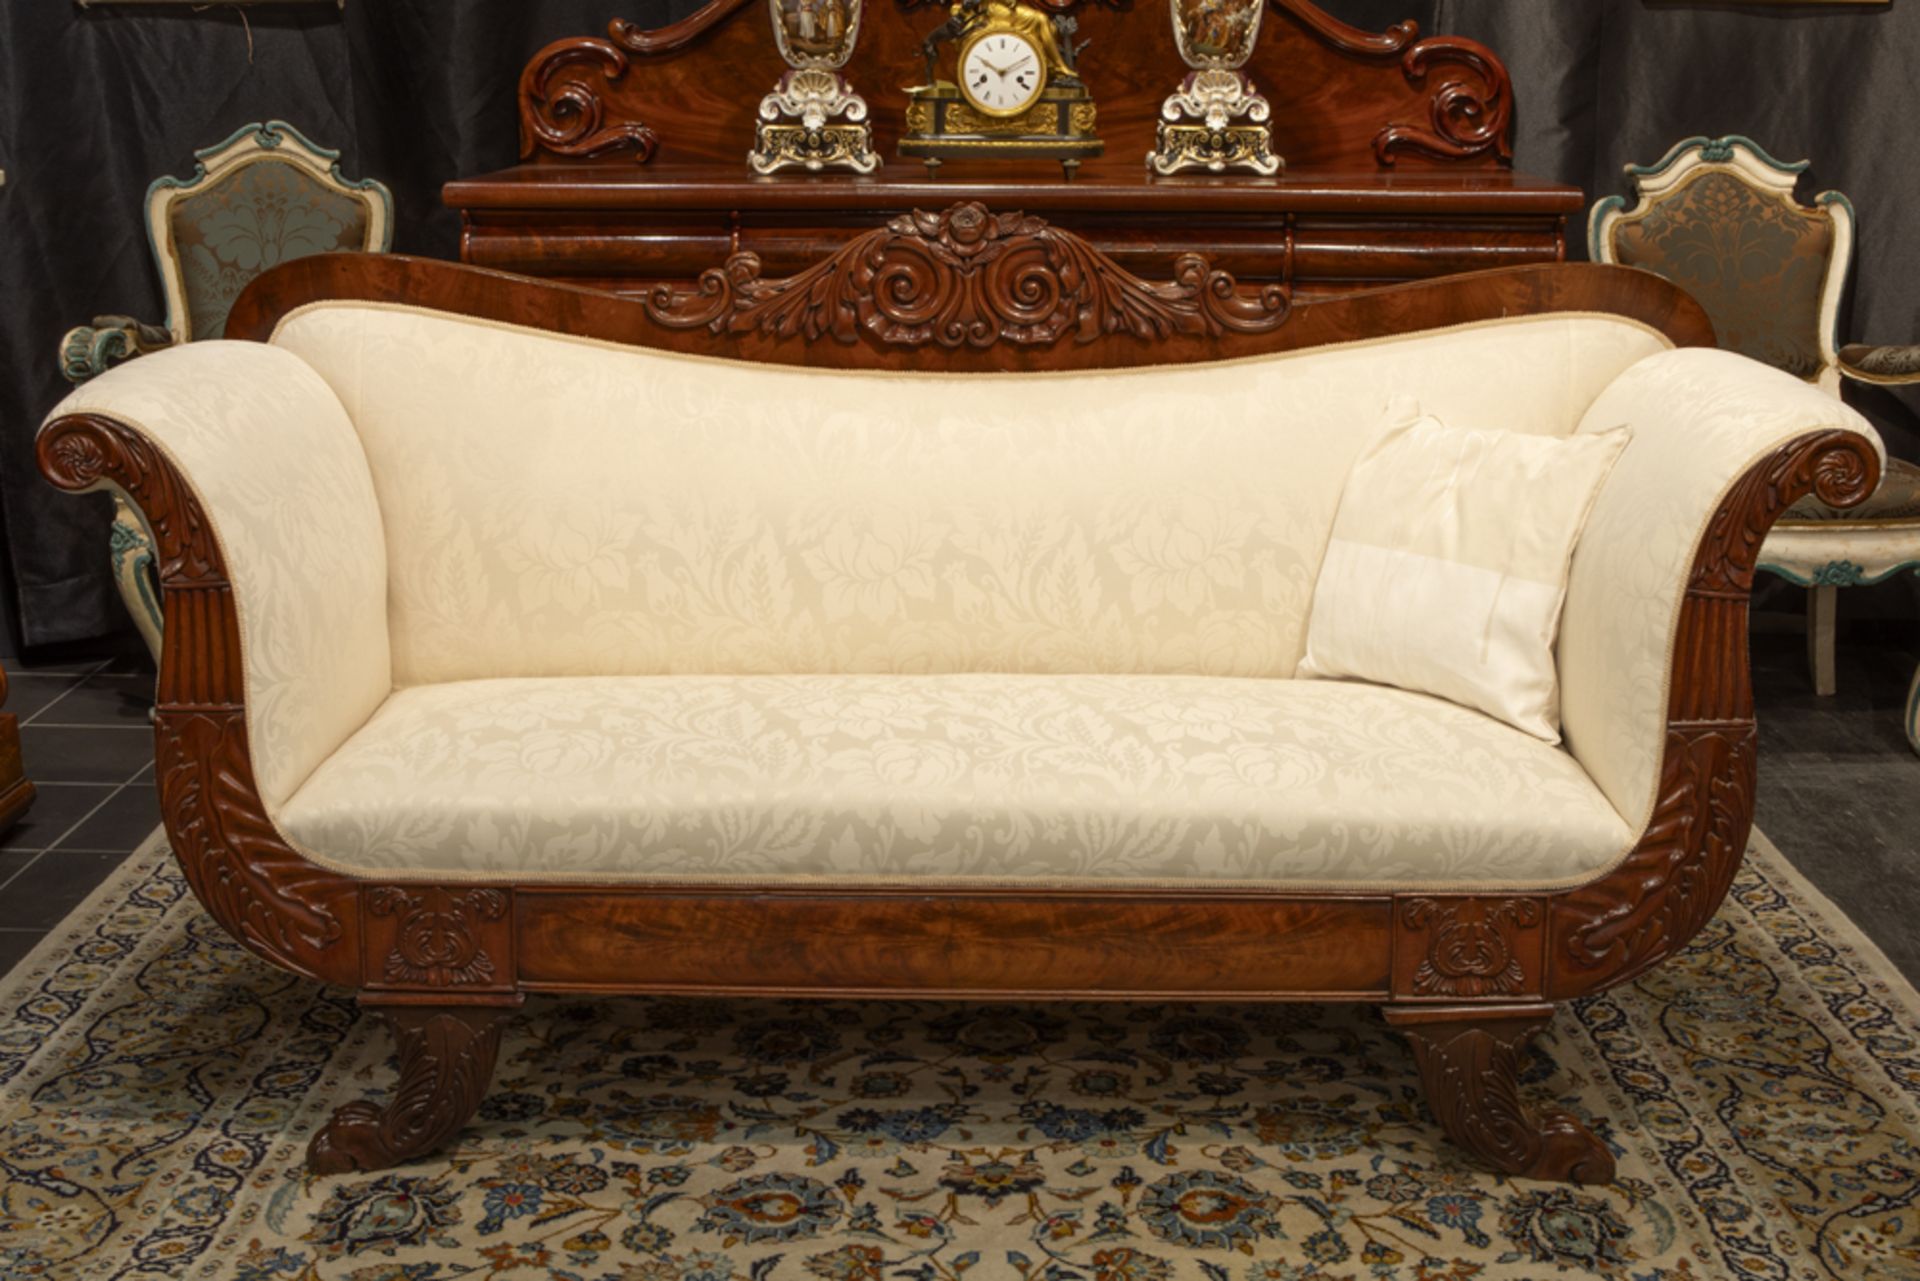 19th Cent. presumably French, Charles X sofa with a typical lyre model in mahogany ||Negentiende